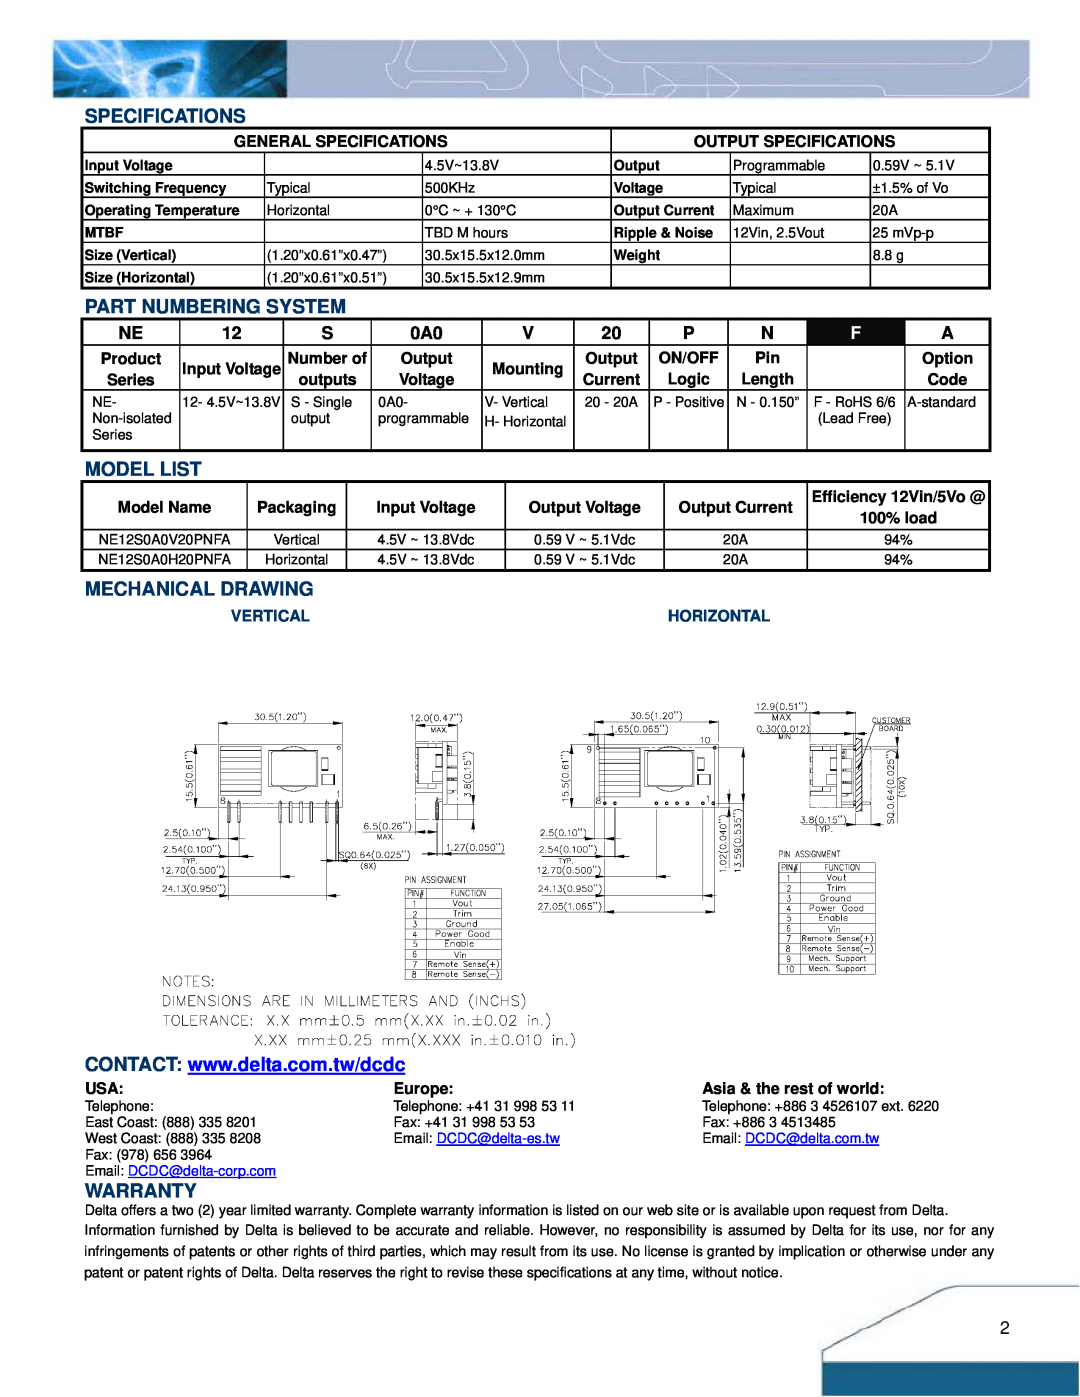 Delta Electronics NE Series Specifications, Part Numbering System, Model List, Mechanical Drawing, Warranty, Vertical 